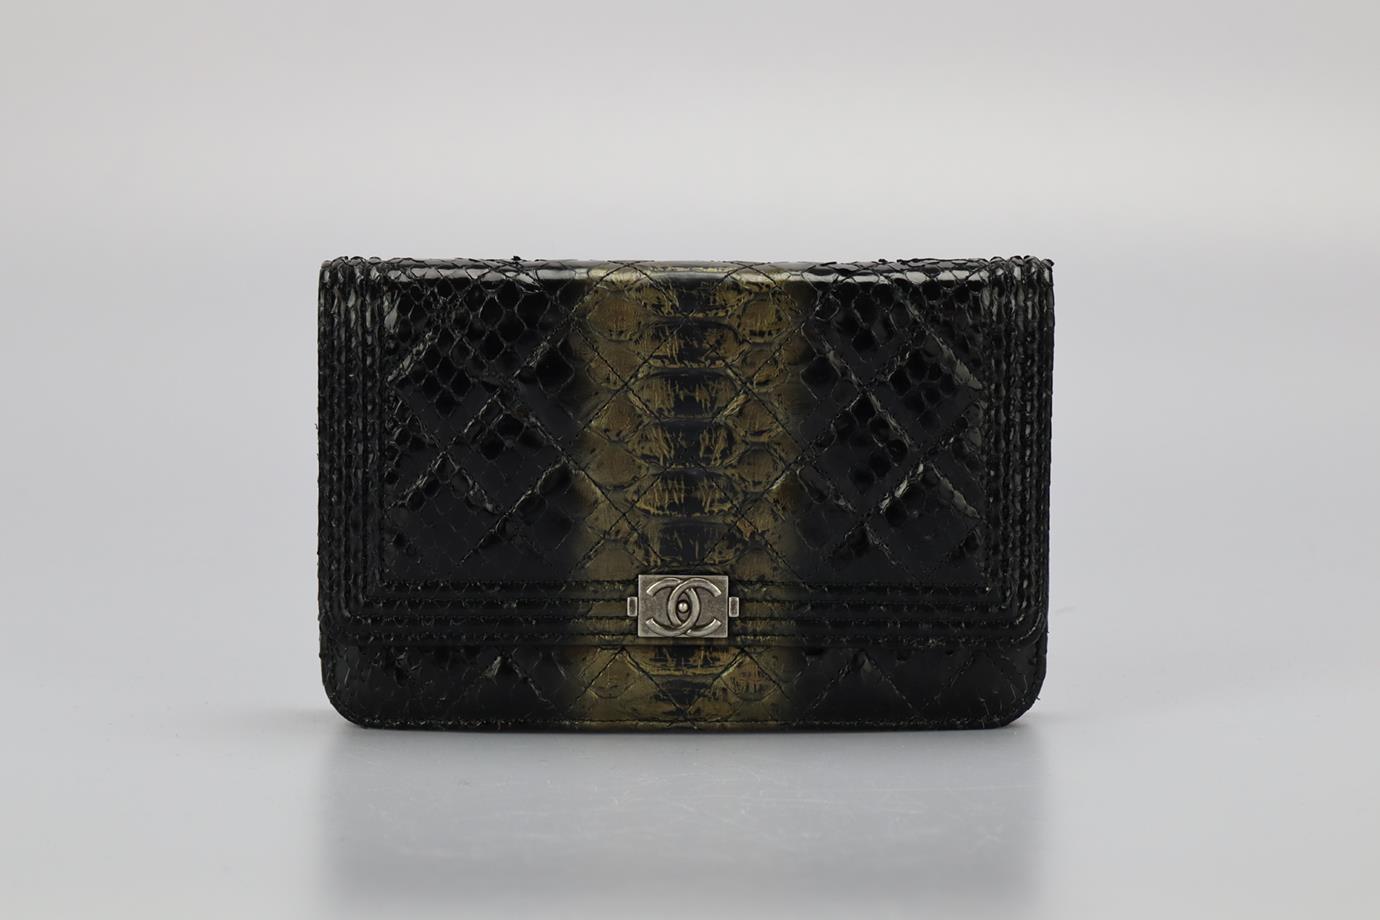 Chanel 2014 Boy Wallet On Chain Quilted Python Shoulder Bag. Black and bronze. Snap button fastening - Front. Comes with - authenticity card. Does not come with - dustbag or box. Height: 15 in. Width: 7.6 in. Depth: 1 in. Strap drop: 14.9 in.